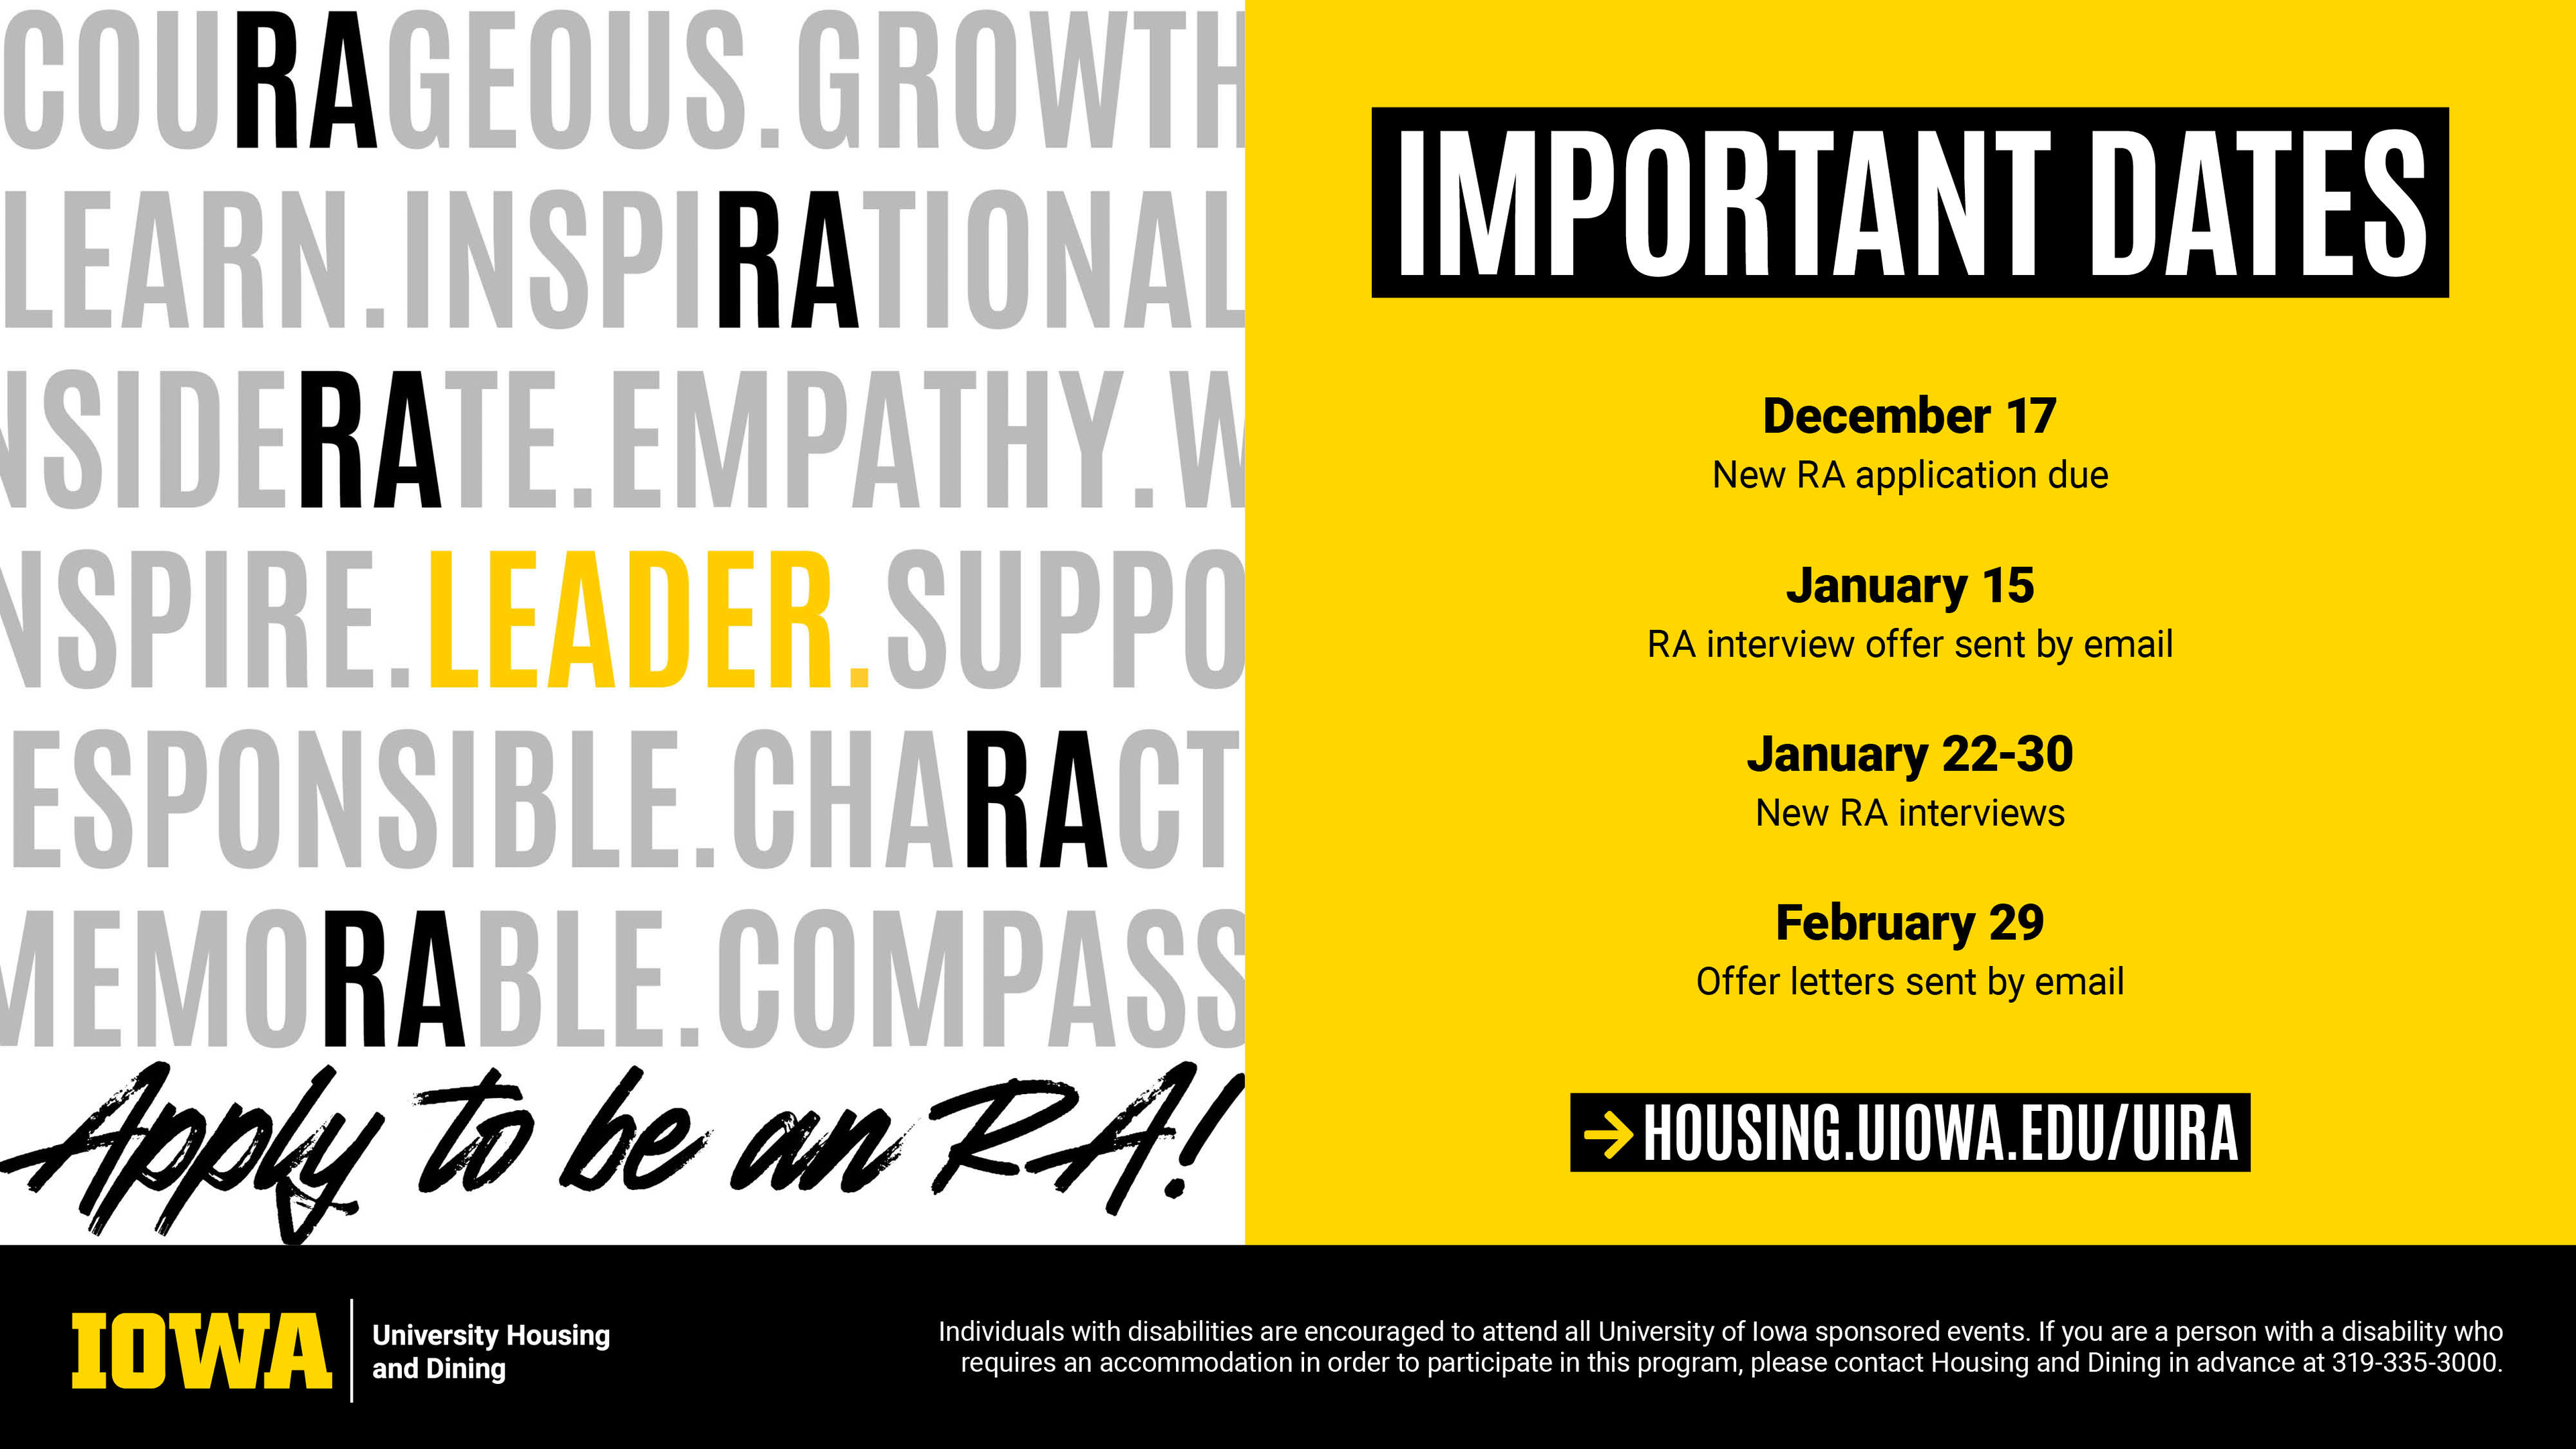 Apply to be an RA! Important Dates: December 17 - New RA Applications Due. January 15 - RA Interview Offer sent by email. January 22-30 - New RA Interviews. February 29 - Offer letters sent via email.